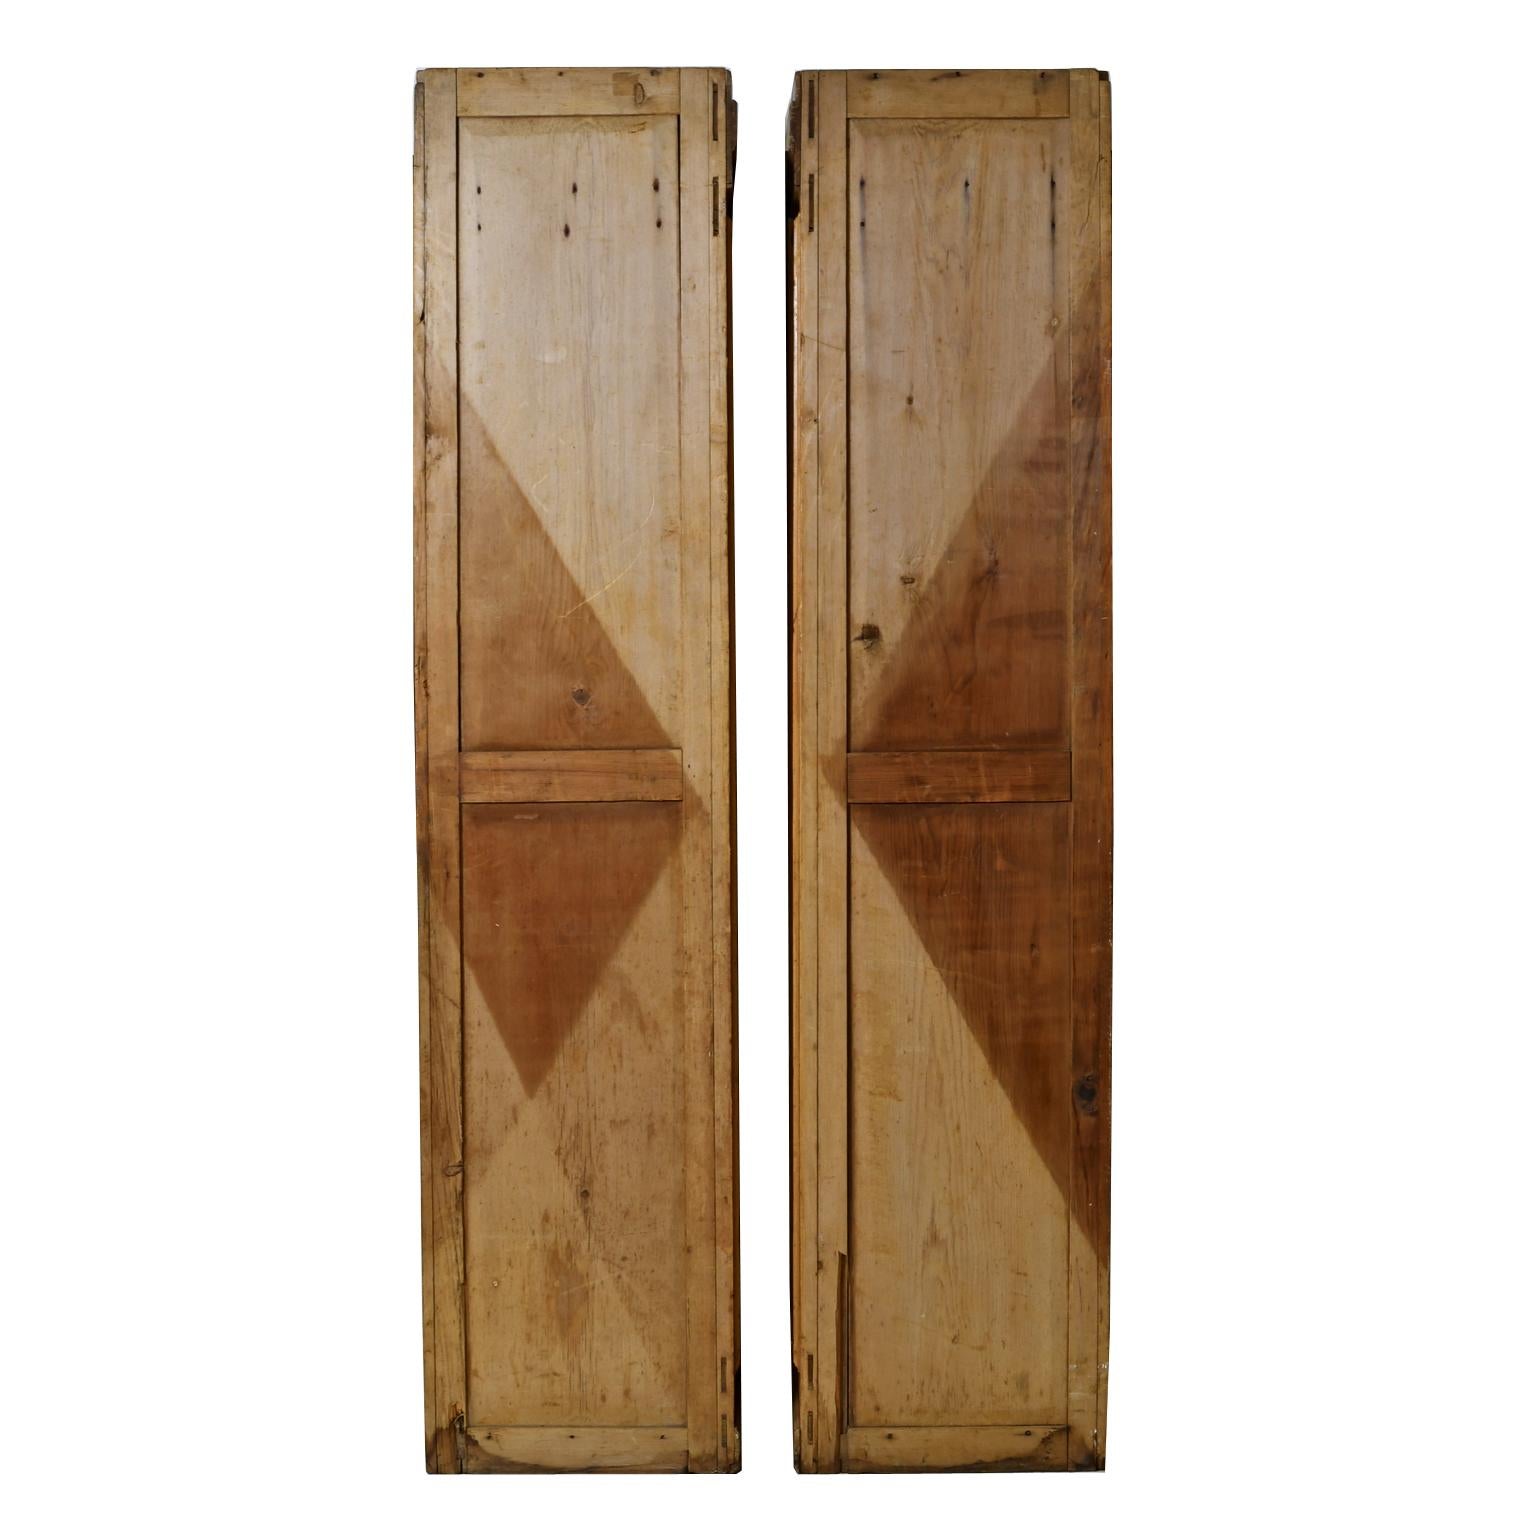 19th Century Pair of Antique Narrow & Tall English Gothic-Revival Lockers in Pine